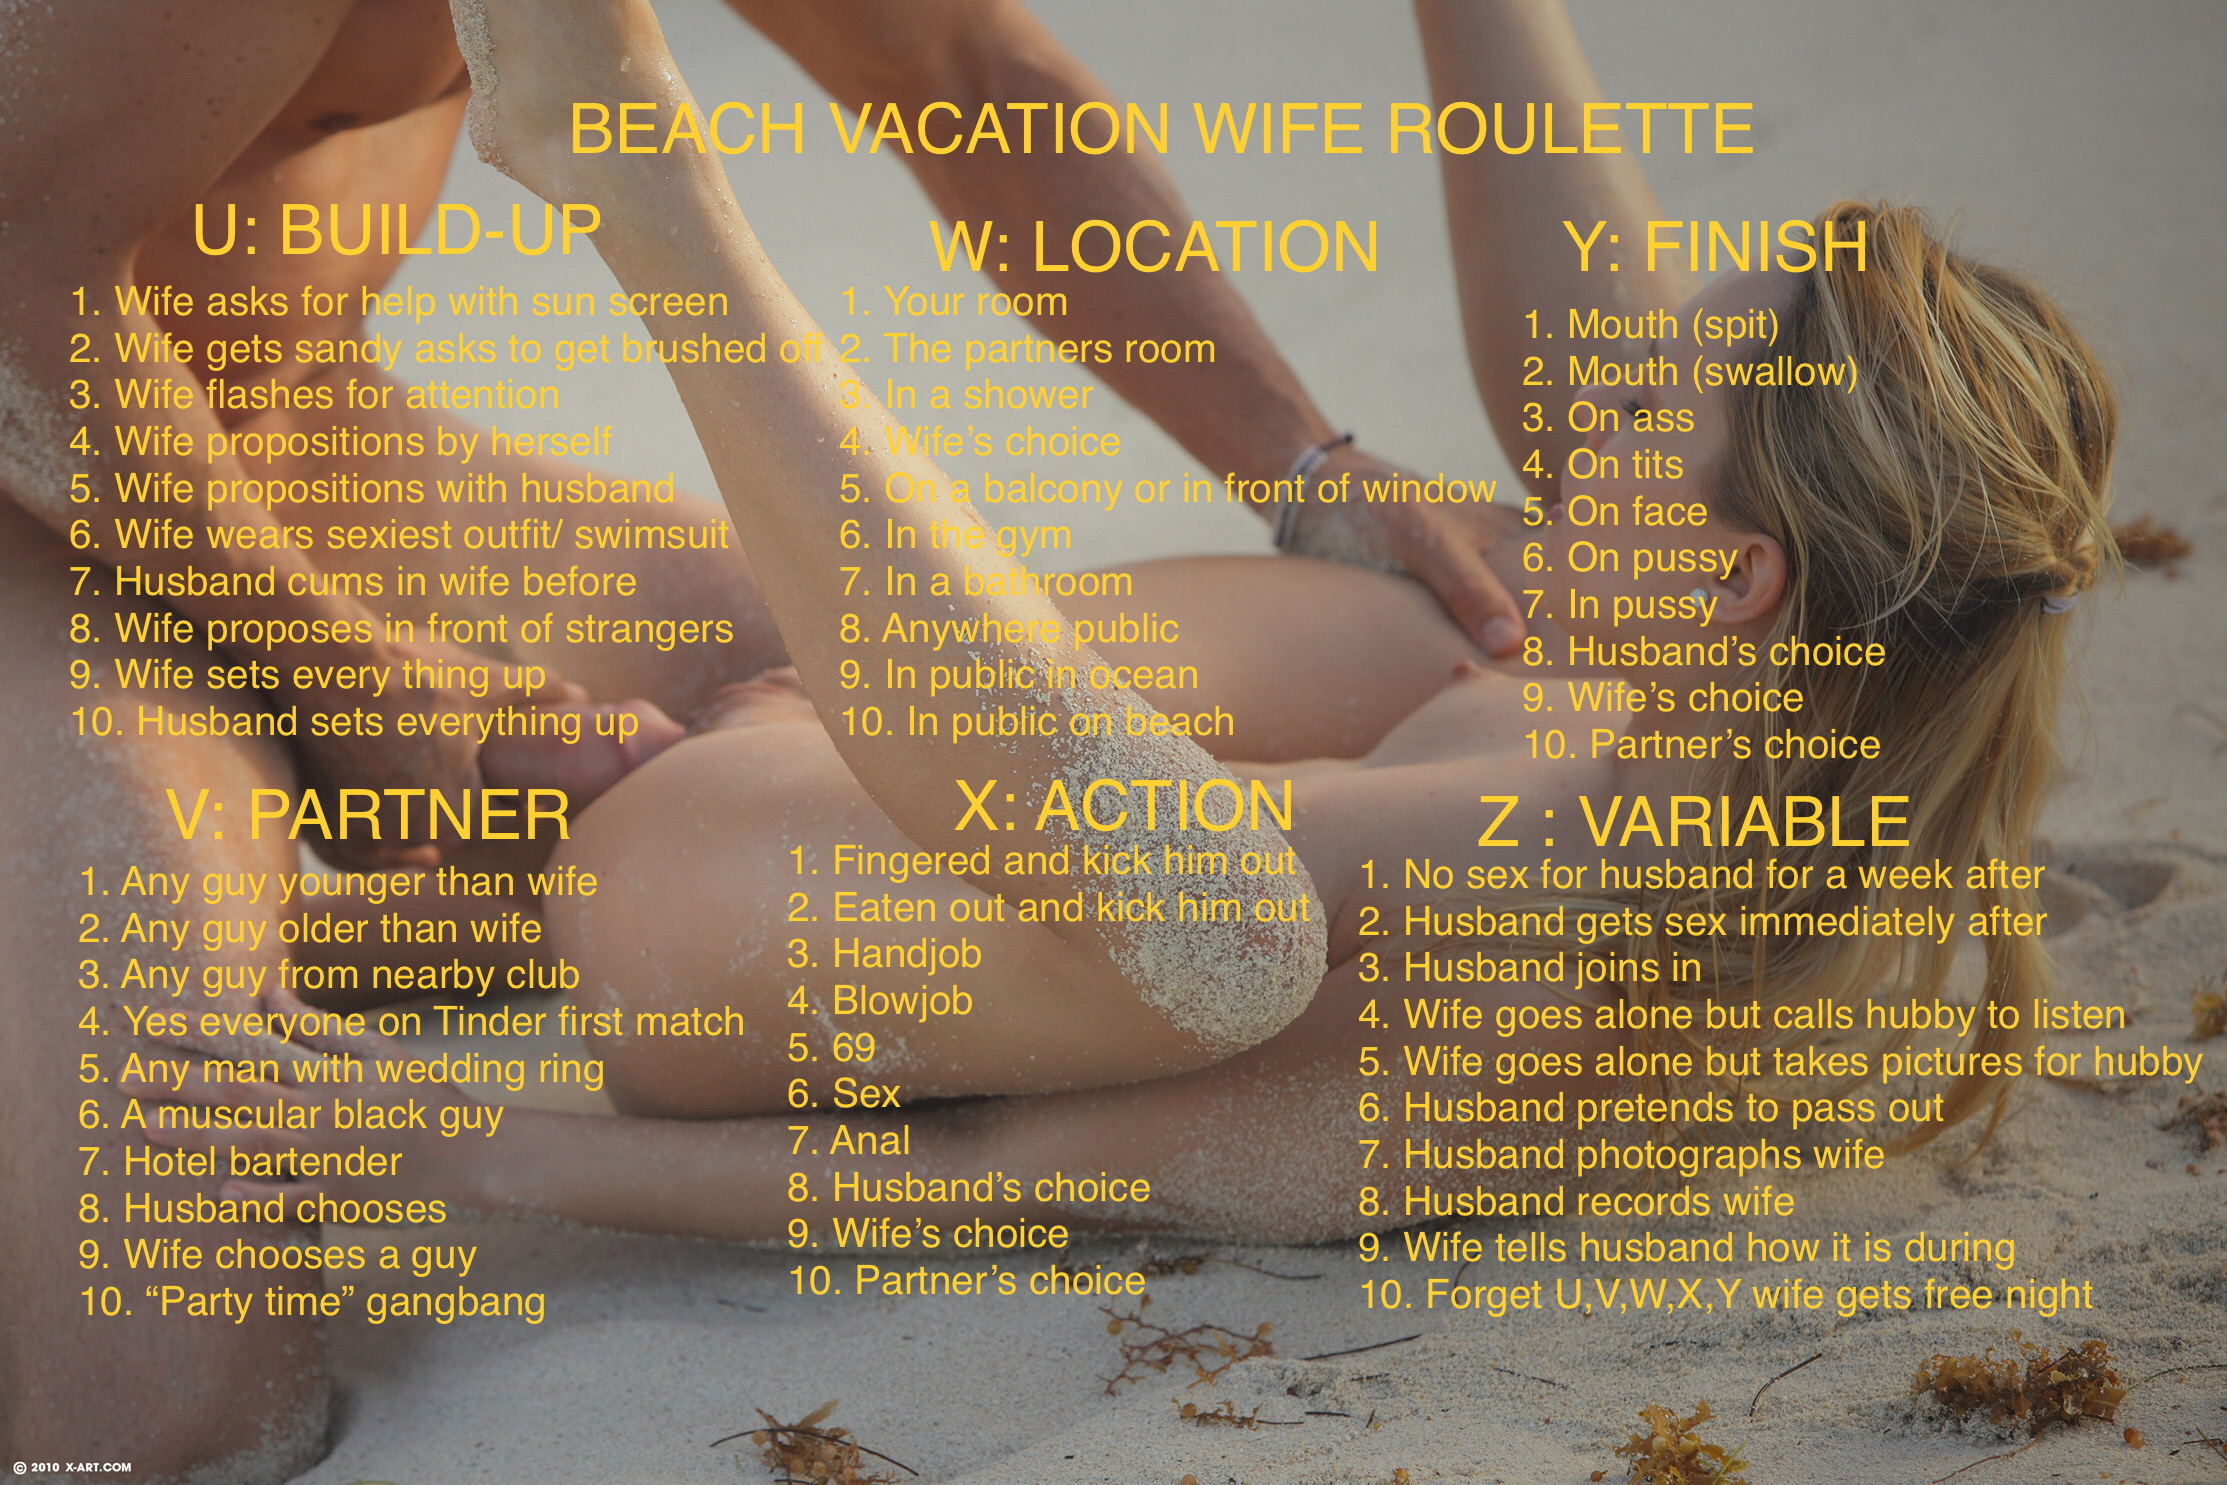 Beach vacation wife roulette photo